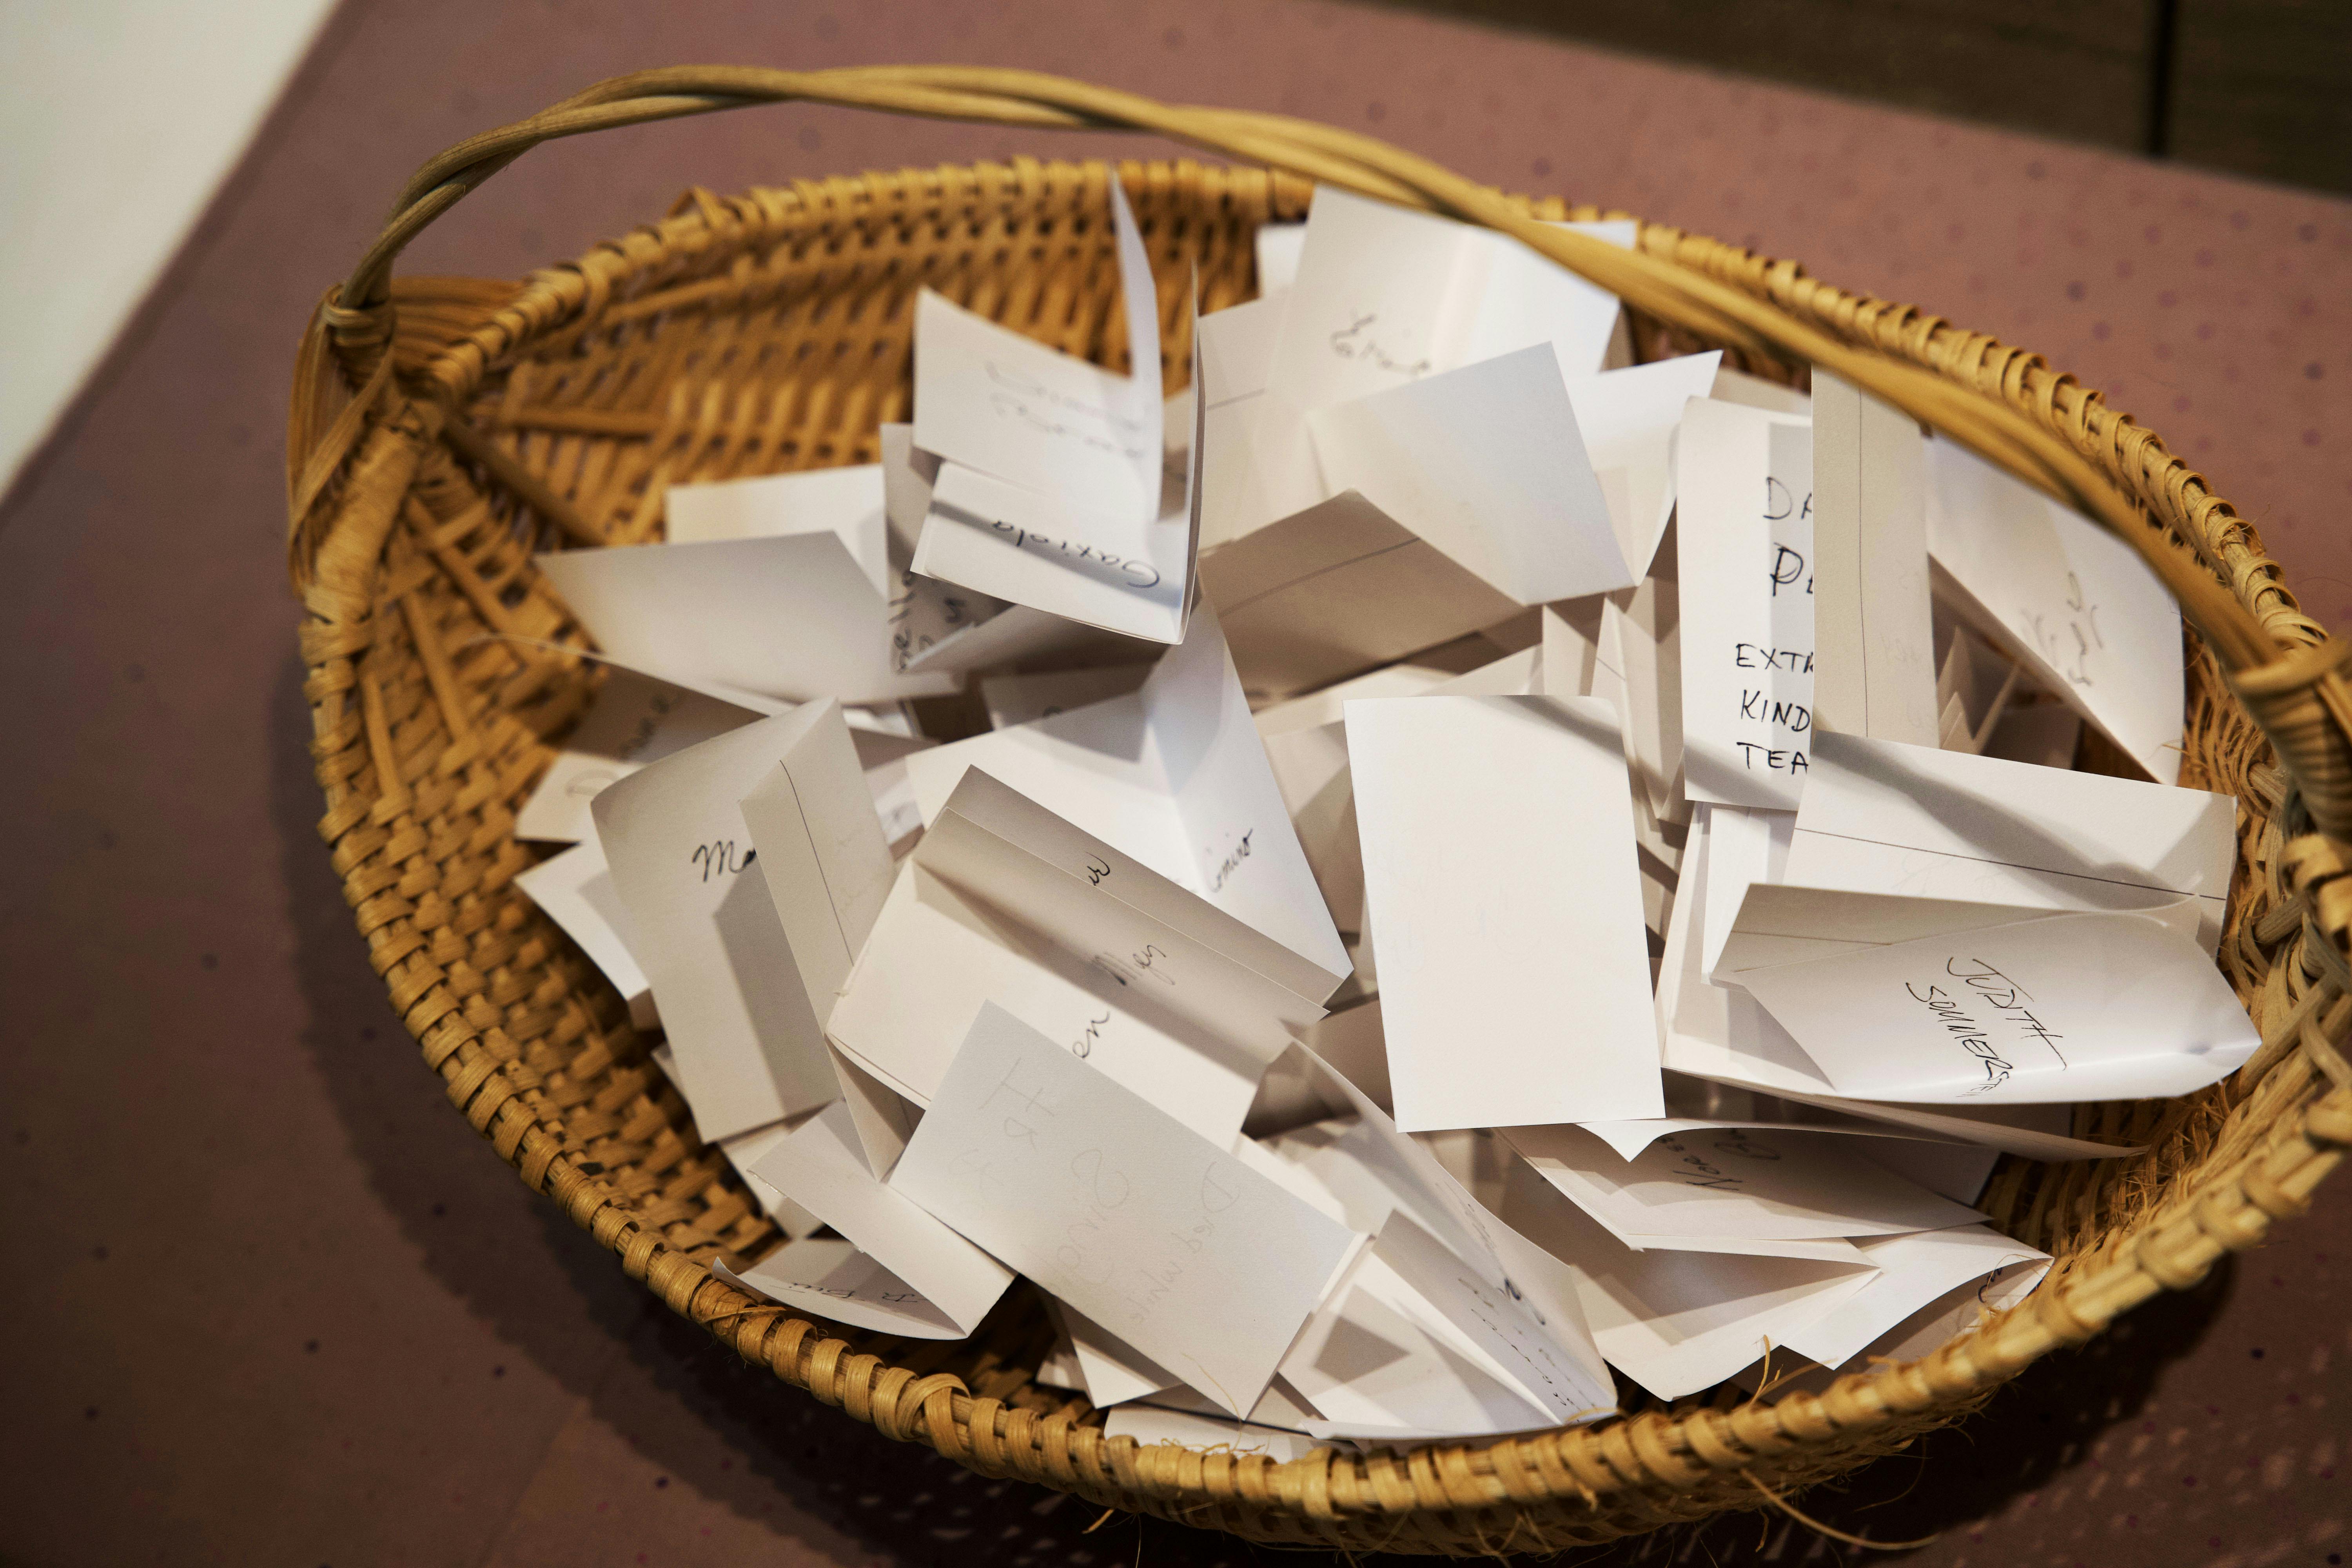 Visitors were invited to write the names of those lost to COVID-19 on a slip of paper and place it in a basket as part of the exhibit.